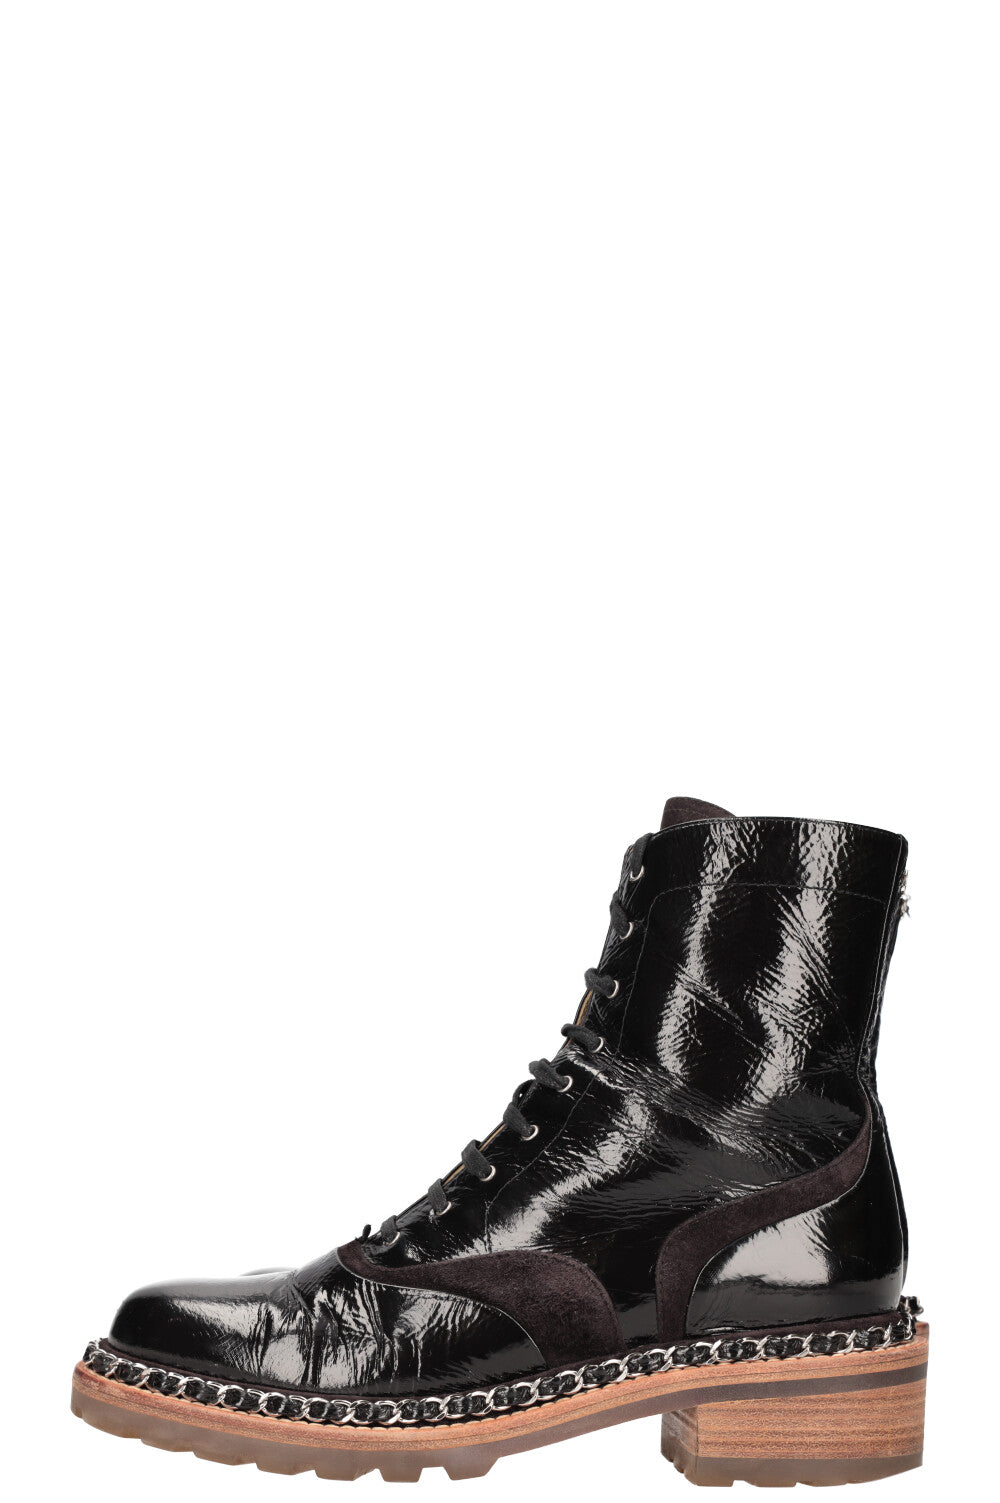 CHANEL Boots Chain Patent Leather Black